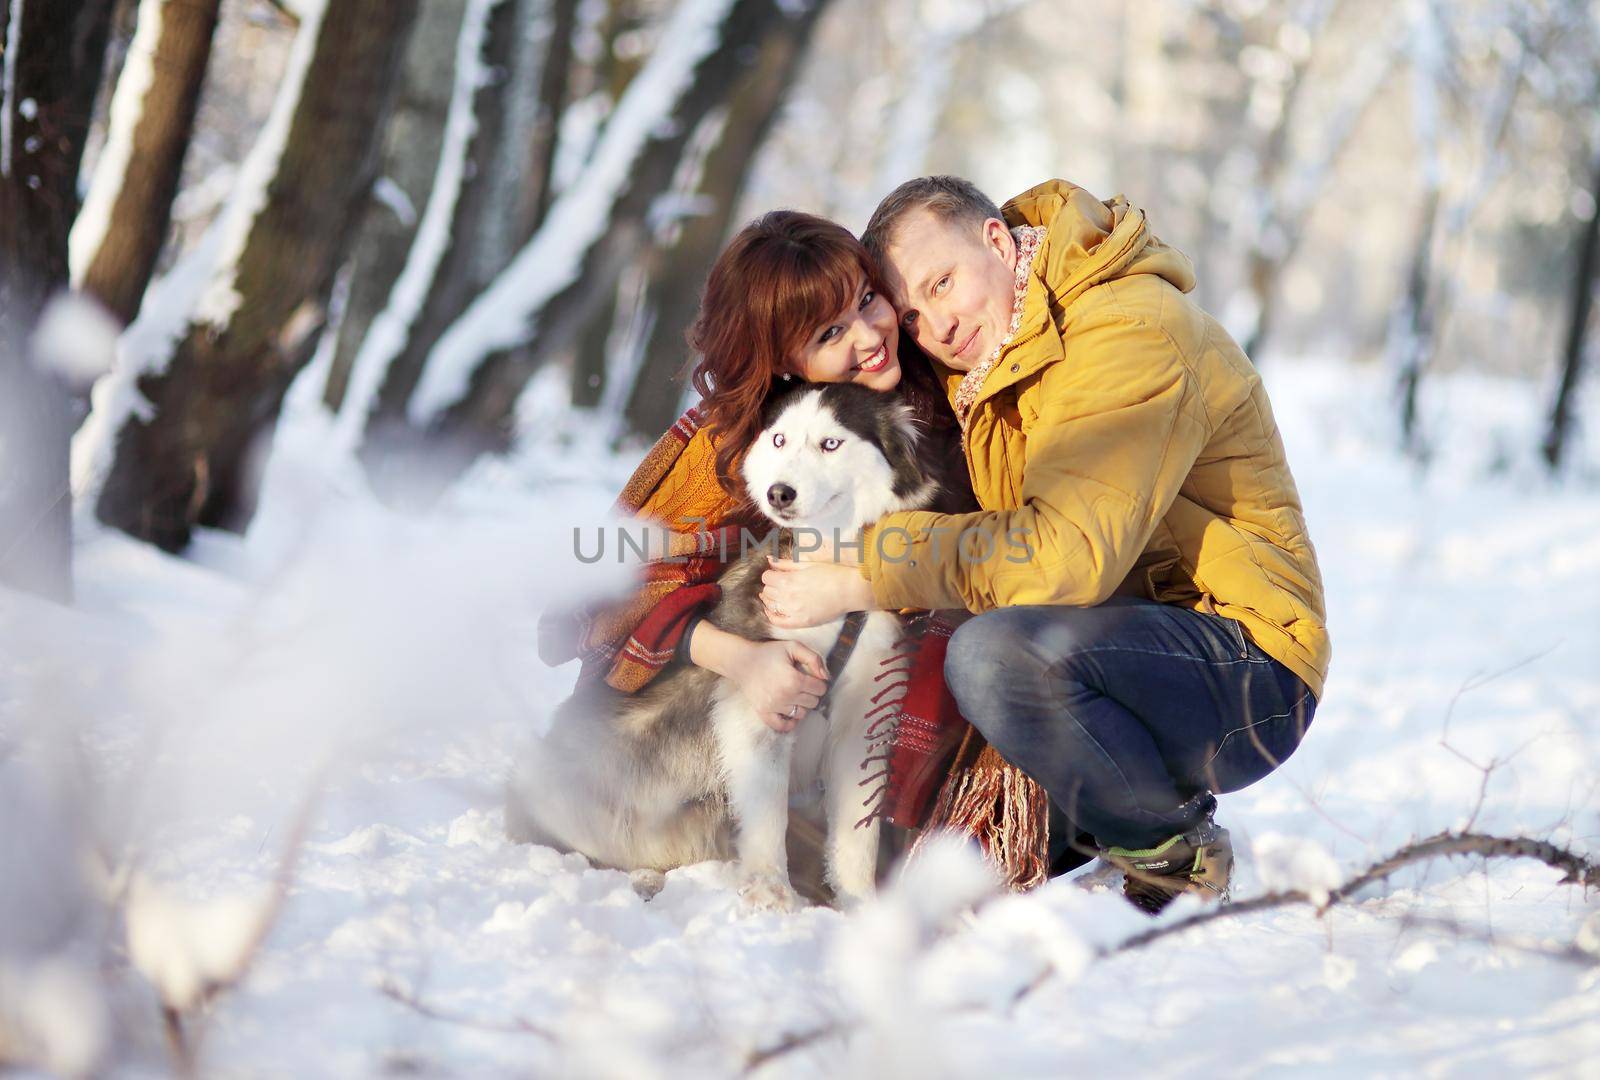 Couple smiling and having fun in winter park with their siberian husky dog.